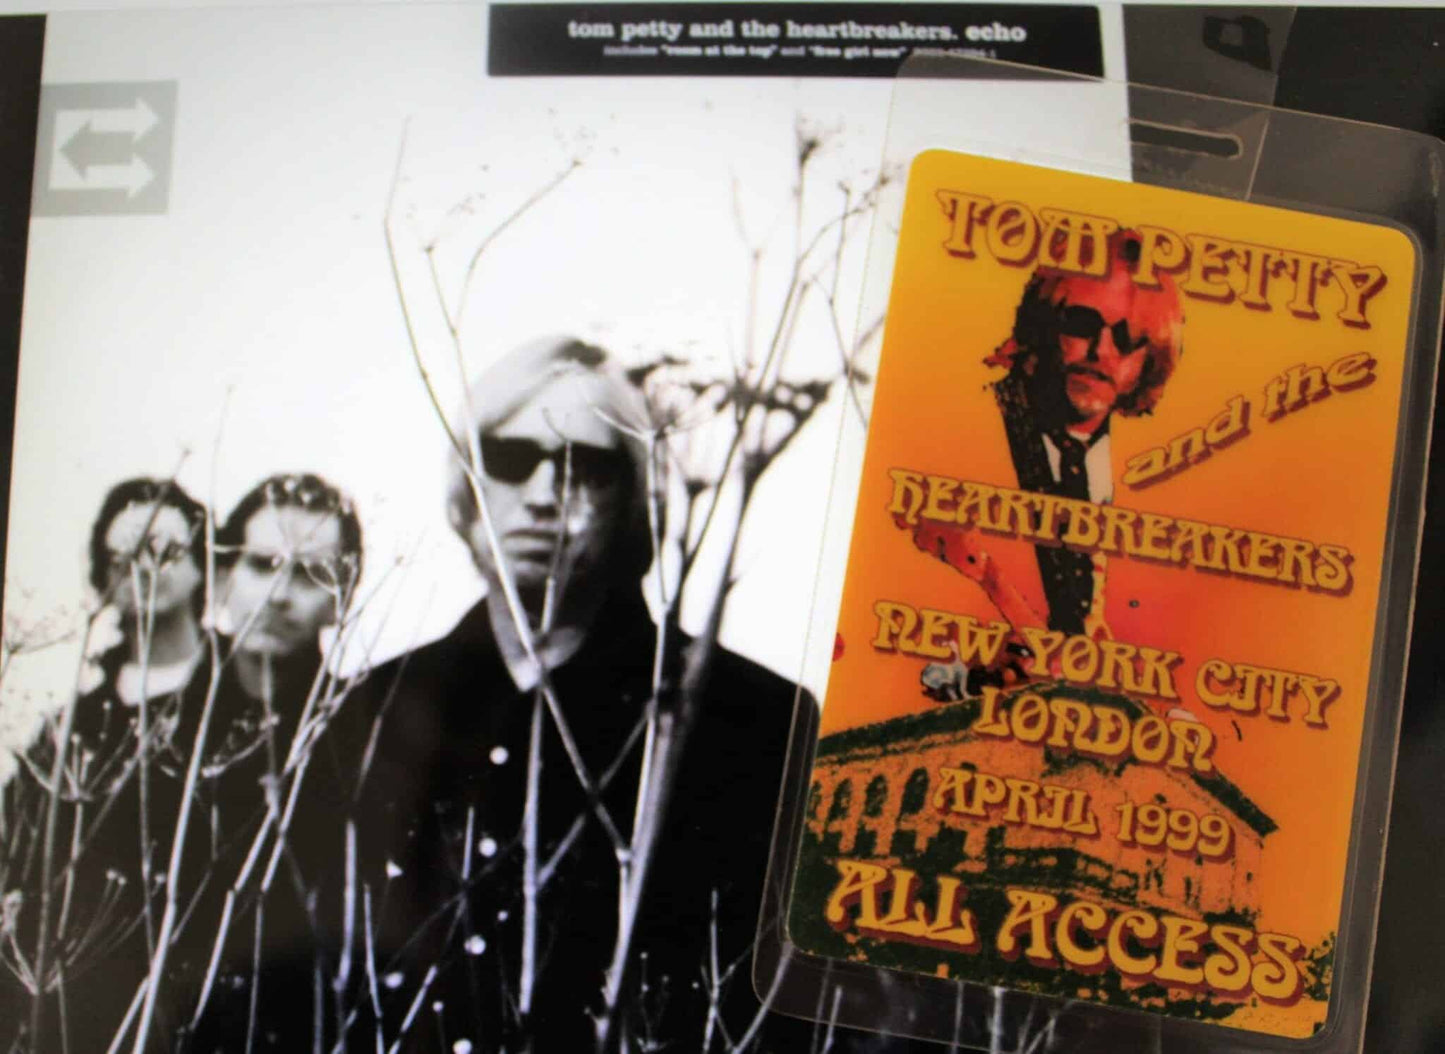 Backstage Pass, Tom Petty and the Heartbreakers, Echo Concert Tour, 1999, Laminated